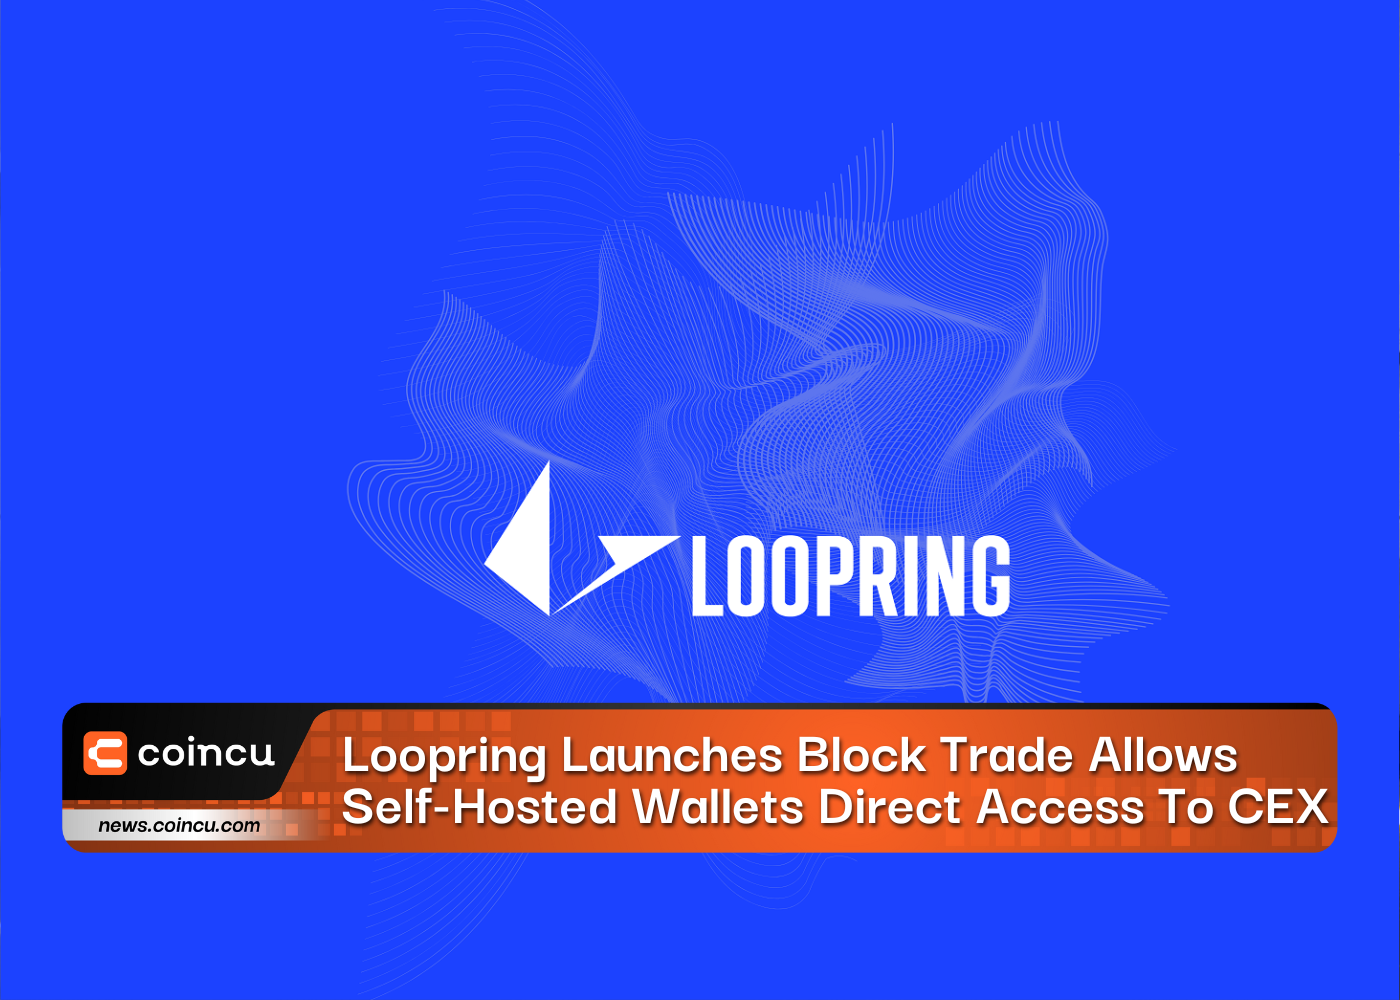 Loopring Launches Block Trade Allows Self-Hosted Wallets Direct Access To CEX